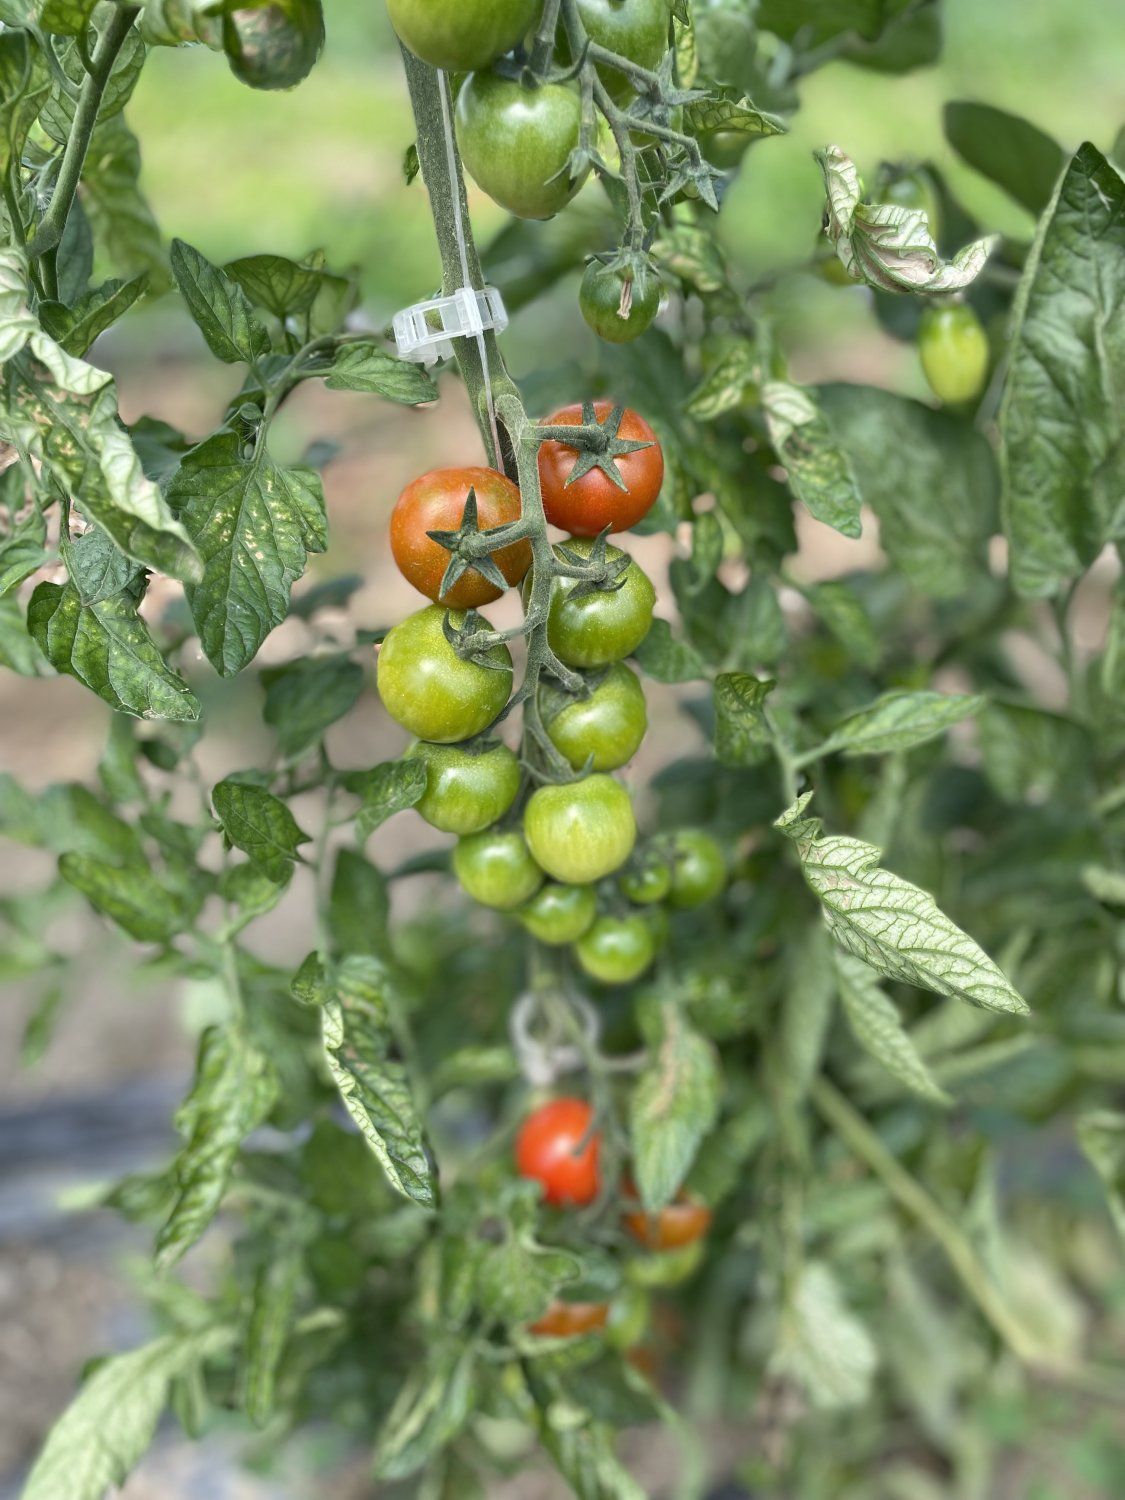 Previous Happening: Tomatoes! and a note from YOUR Farmer Joseph Fox!